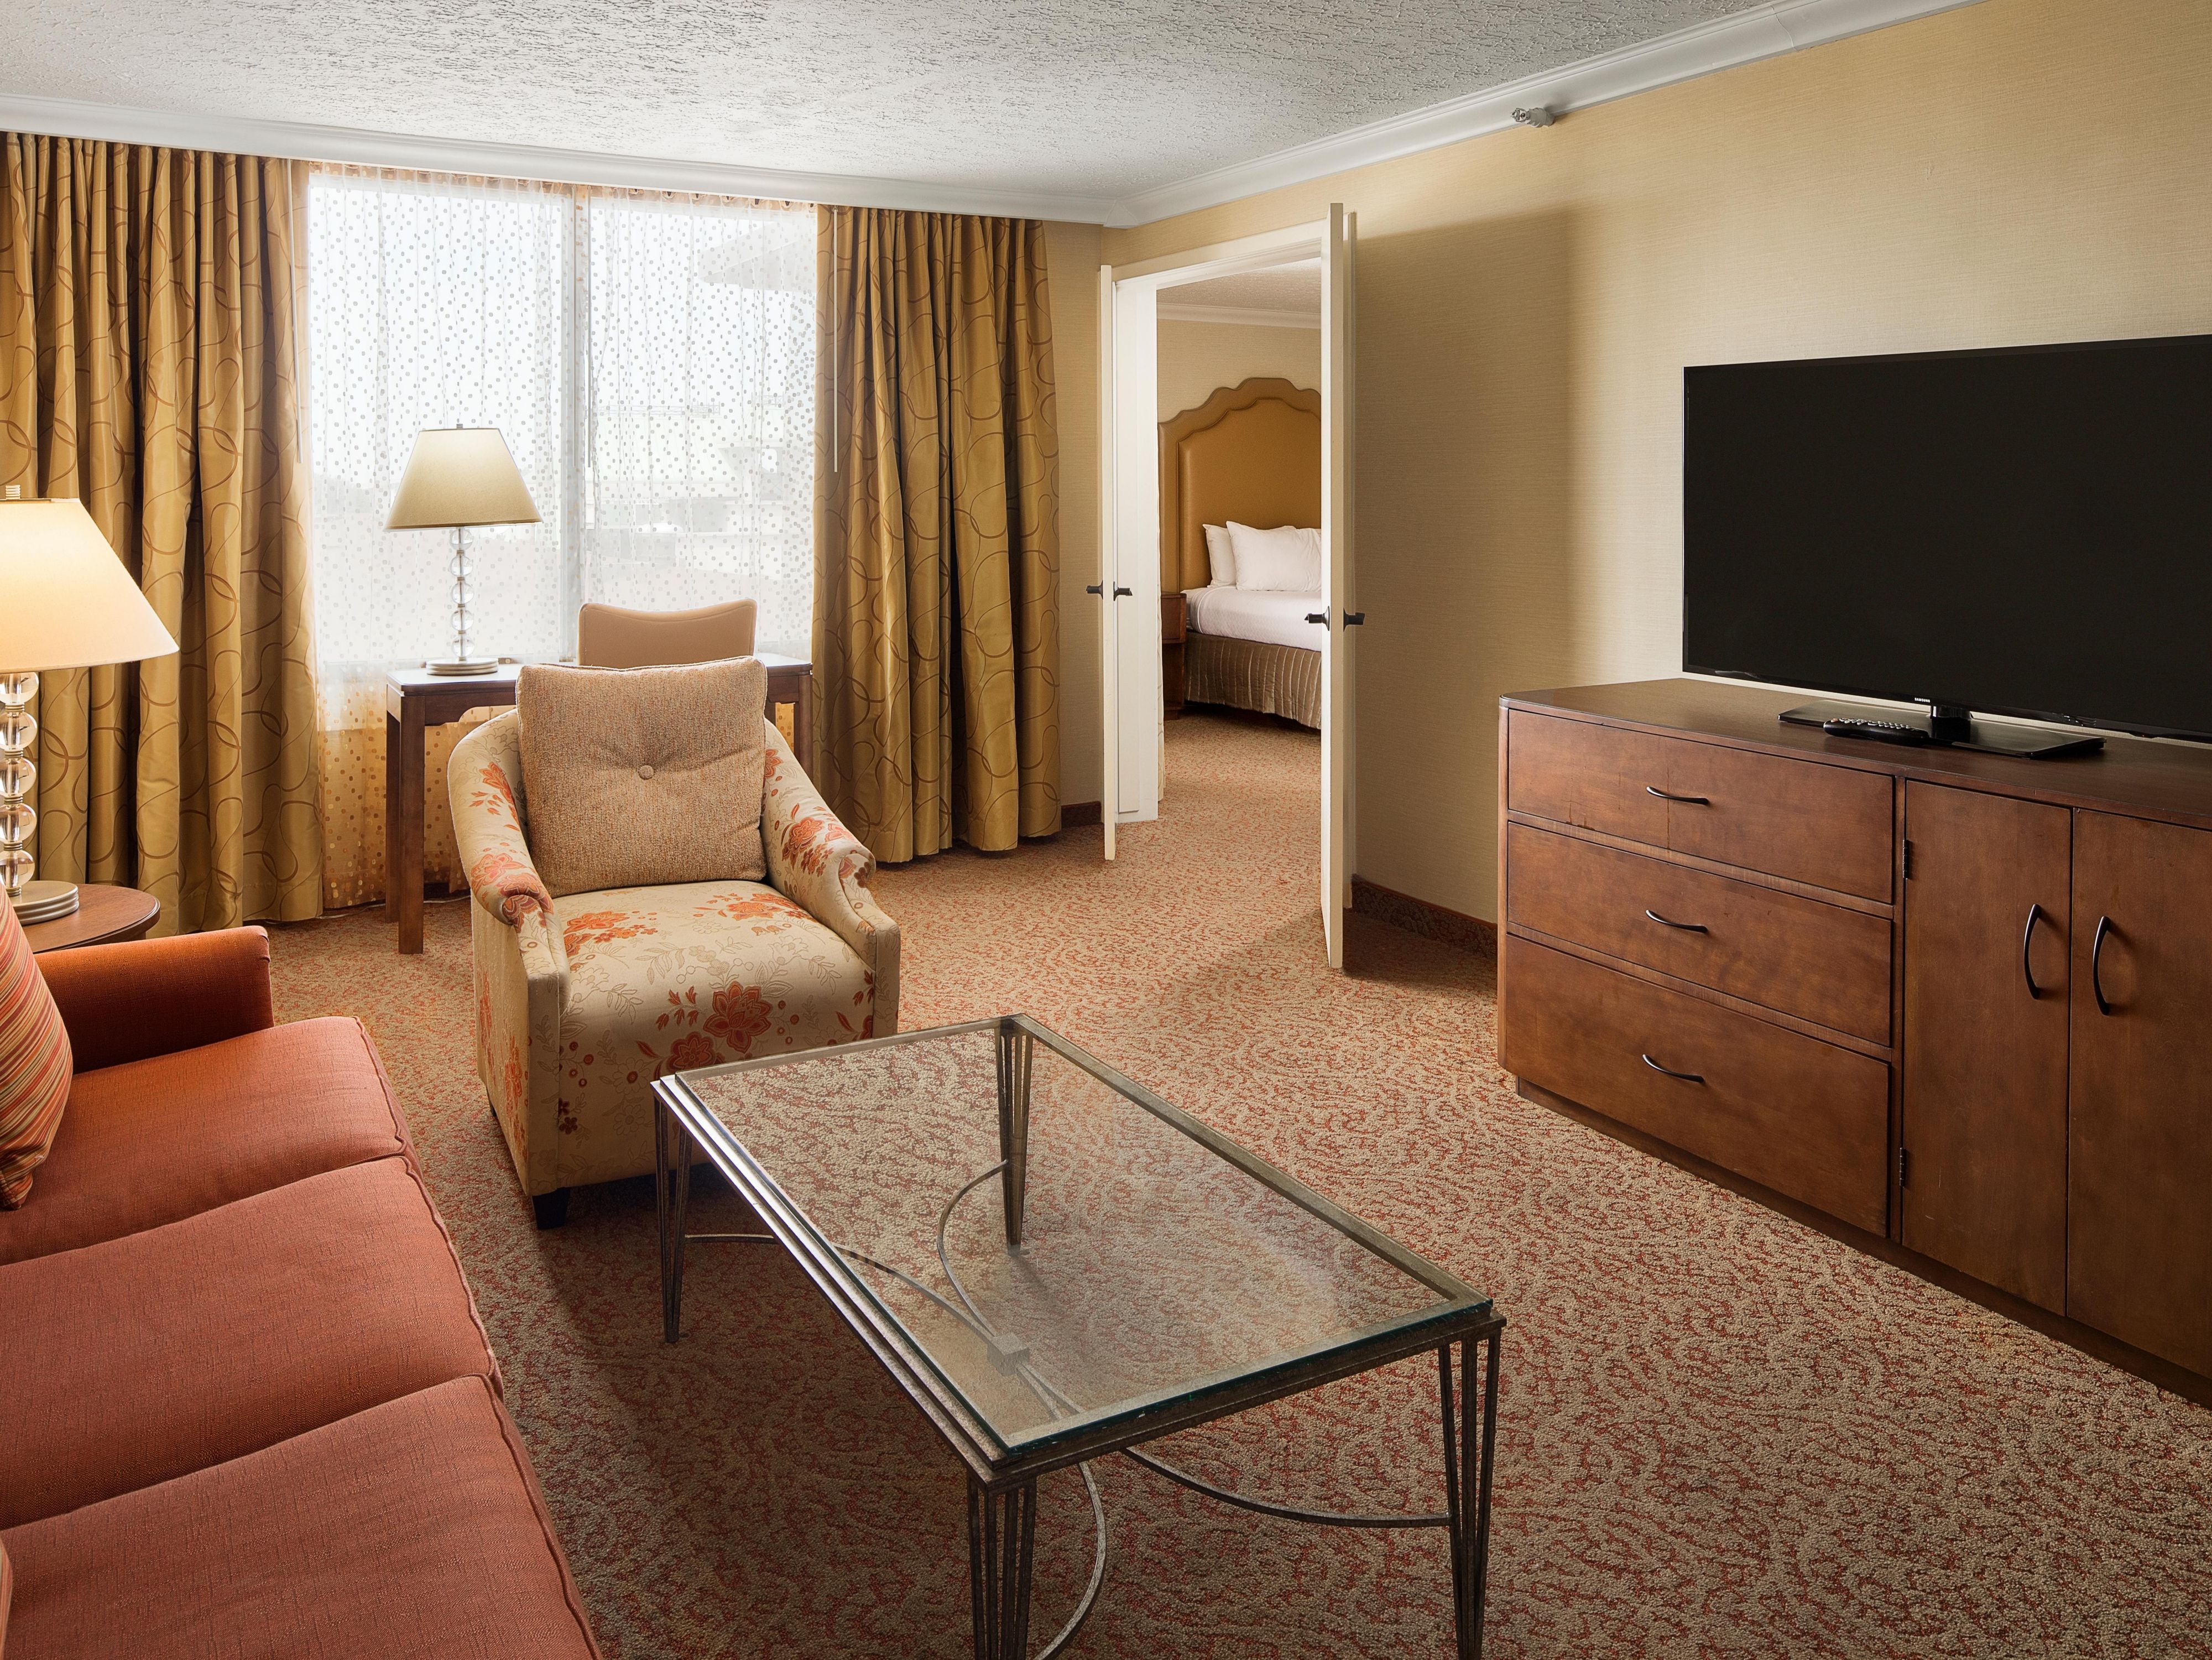 Choose from a variety of spacious one and two- bedroom suites for extra comfort and convenience during your stay. Whether you are hosting a hospitality event, need a separate room for small meetings or work space, or are looking for something special for that romantic getaway, Crowne Plaza Louisville Expo Ctr. has a suite that will fit your needs.